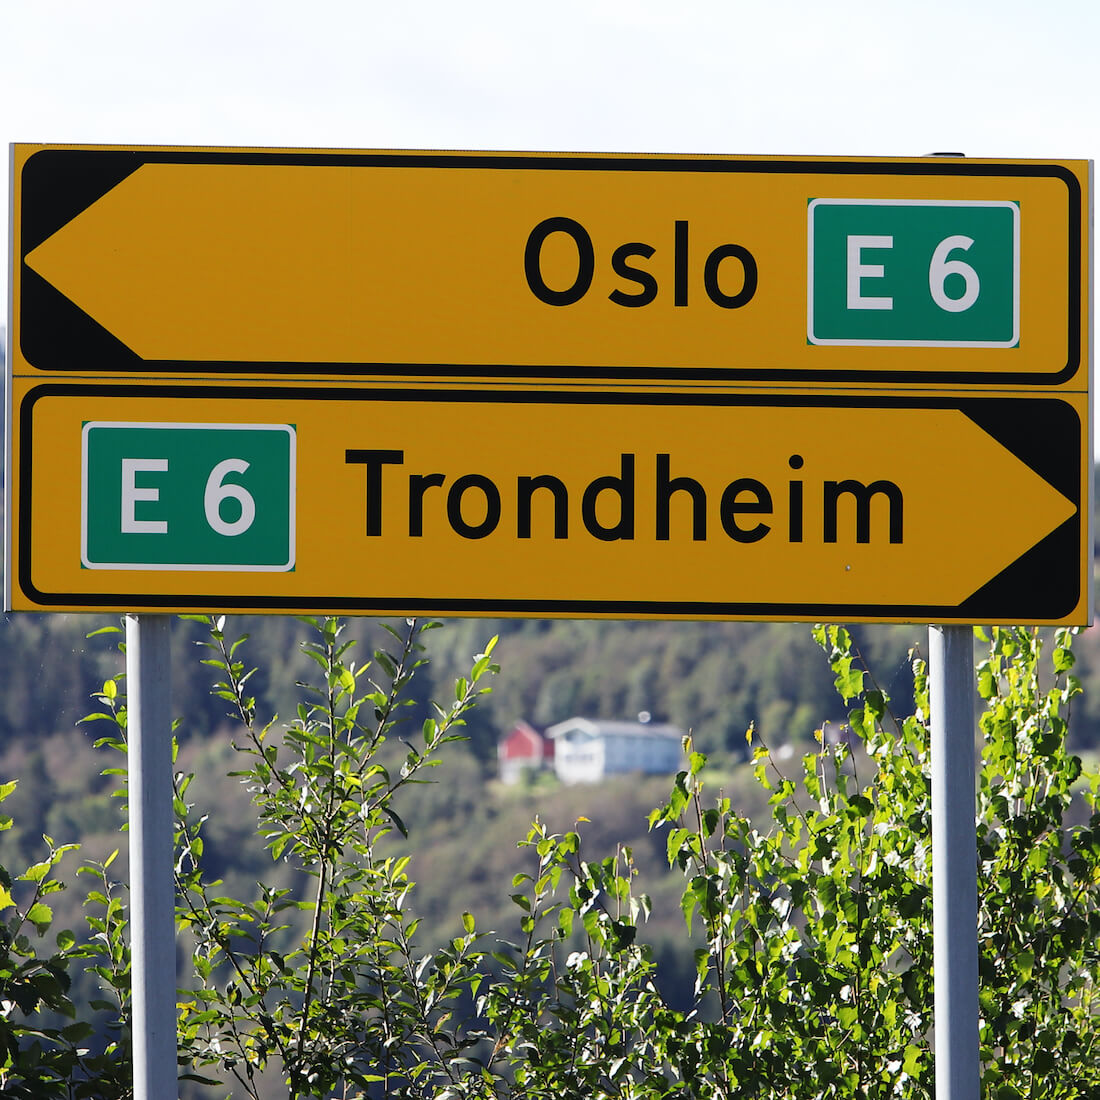 Connection by car trondheim and oslo